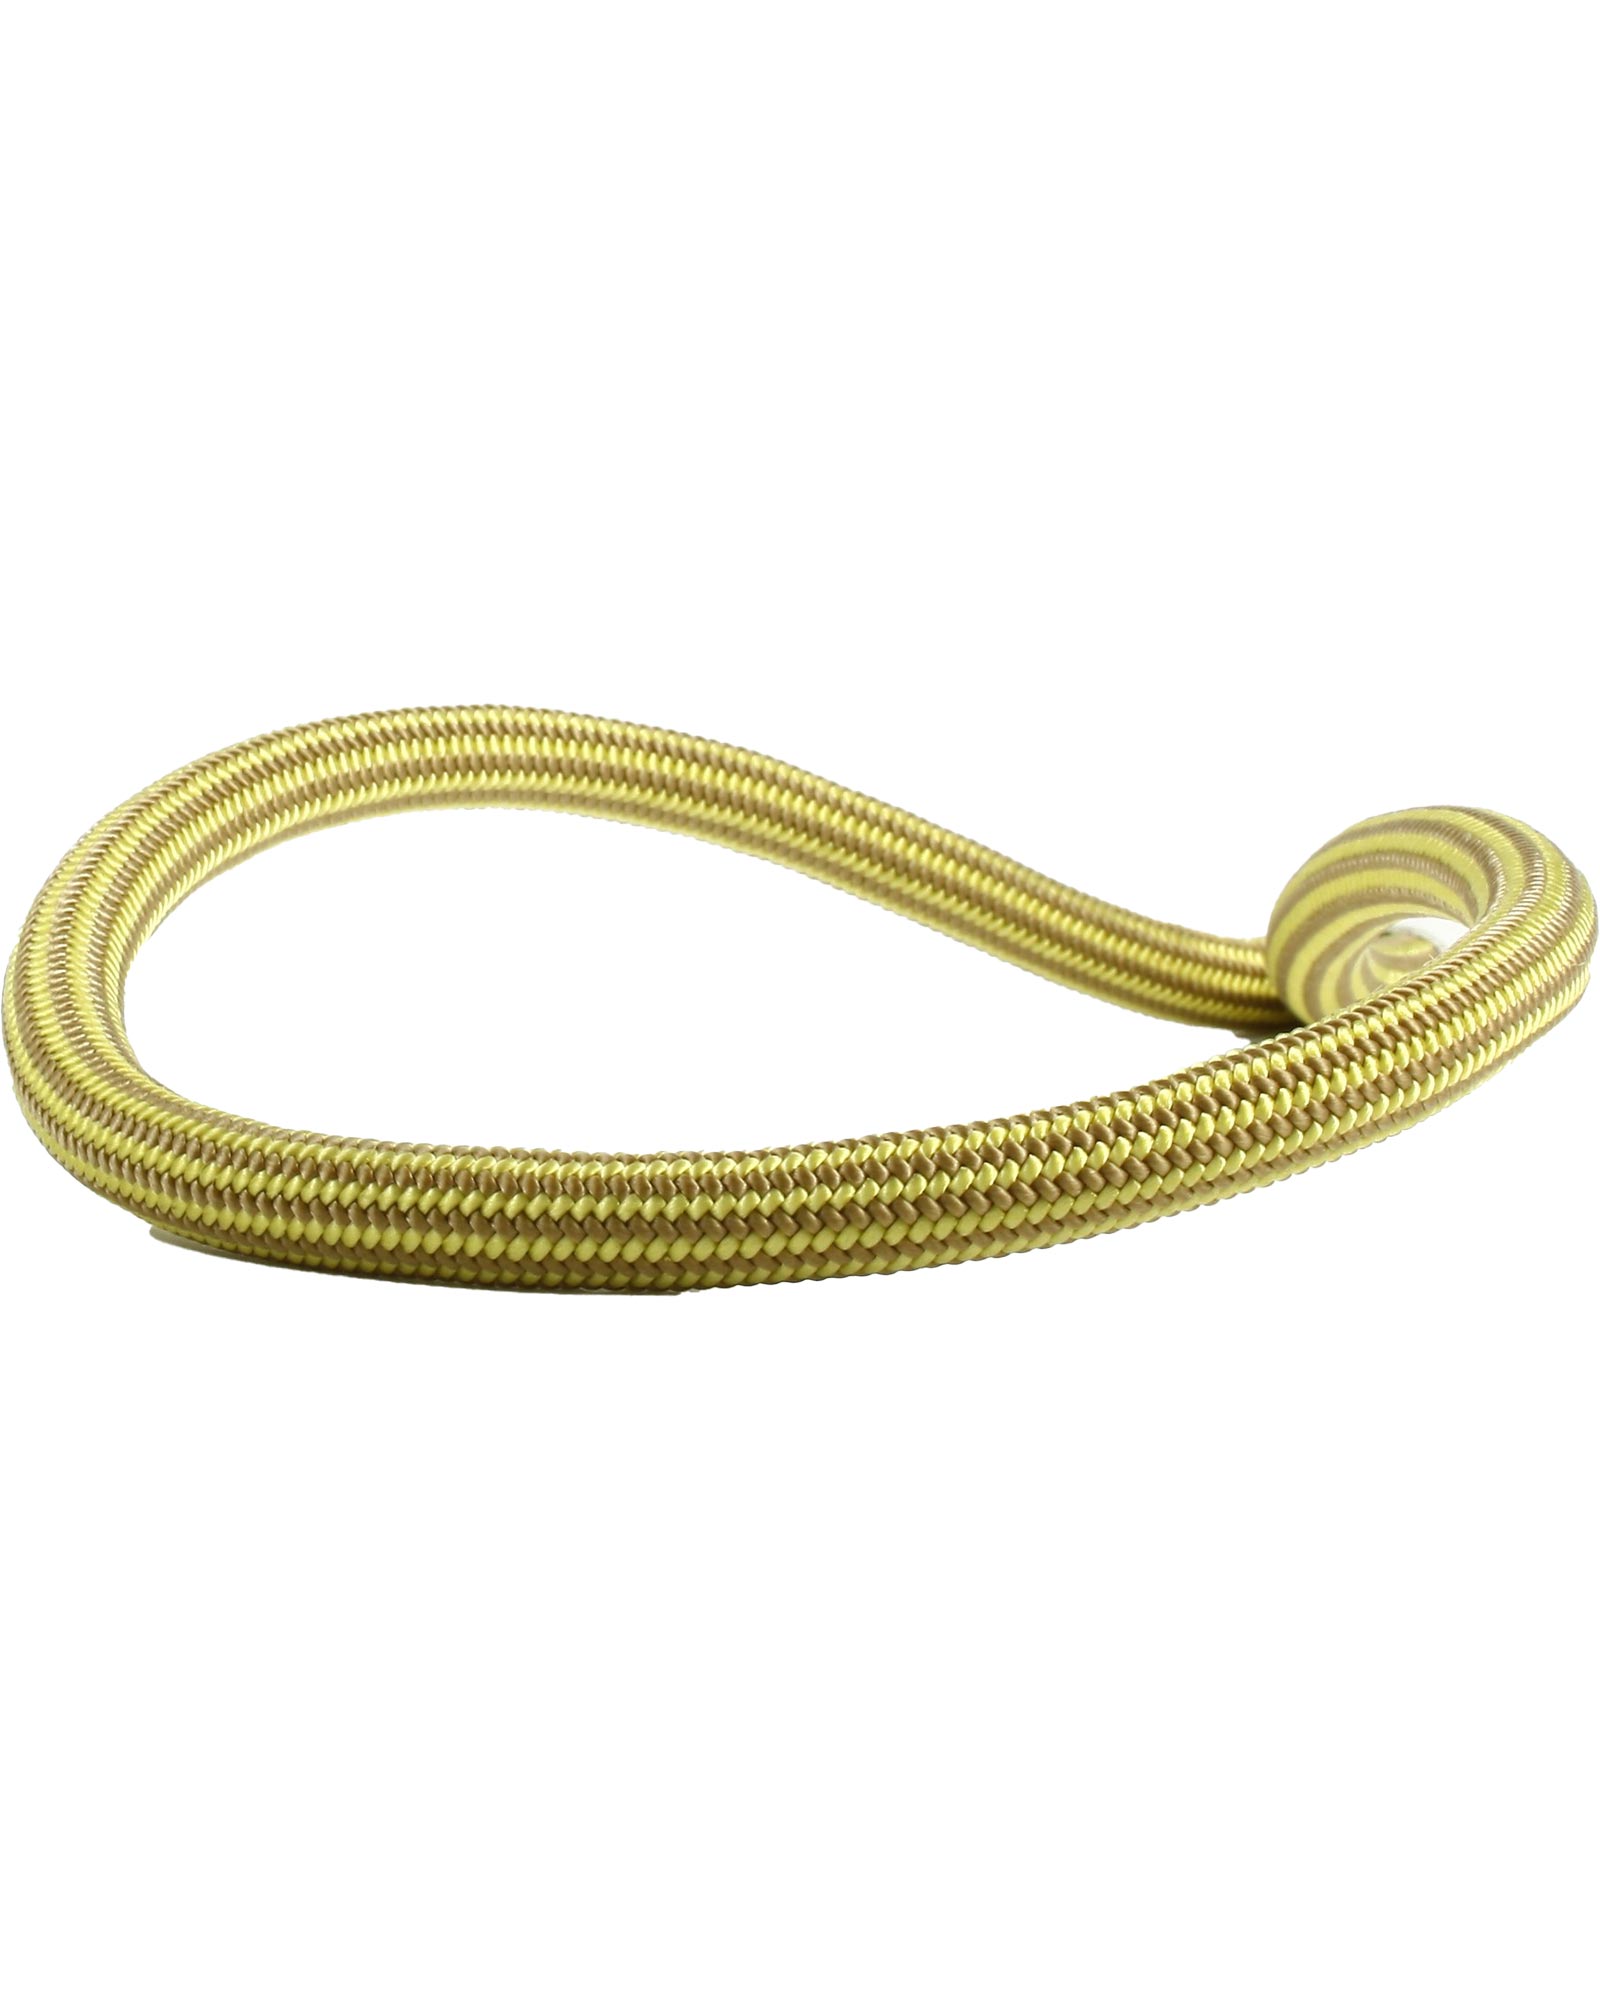 Edelweiss Lithium 8.5mm x 50m Rope 0